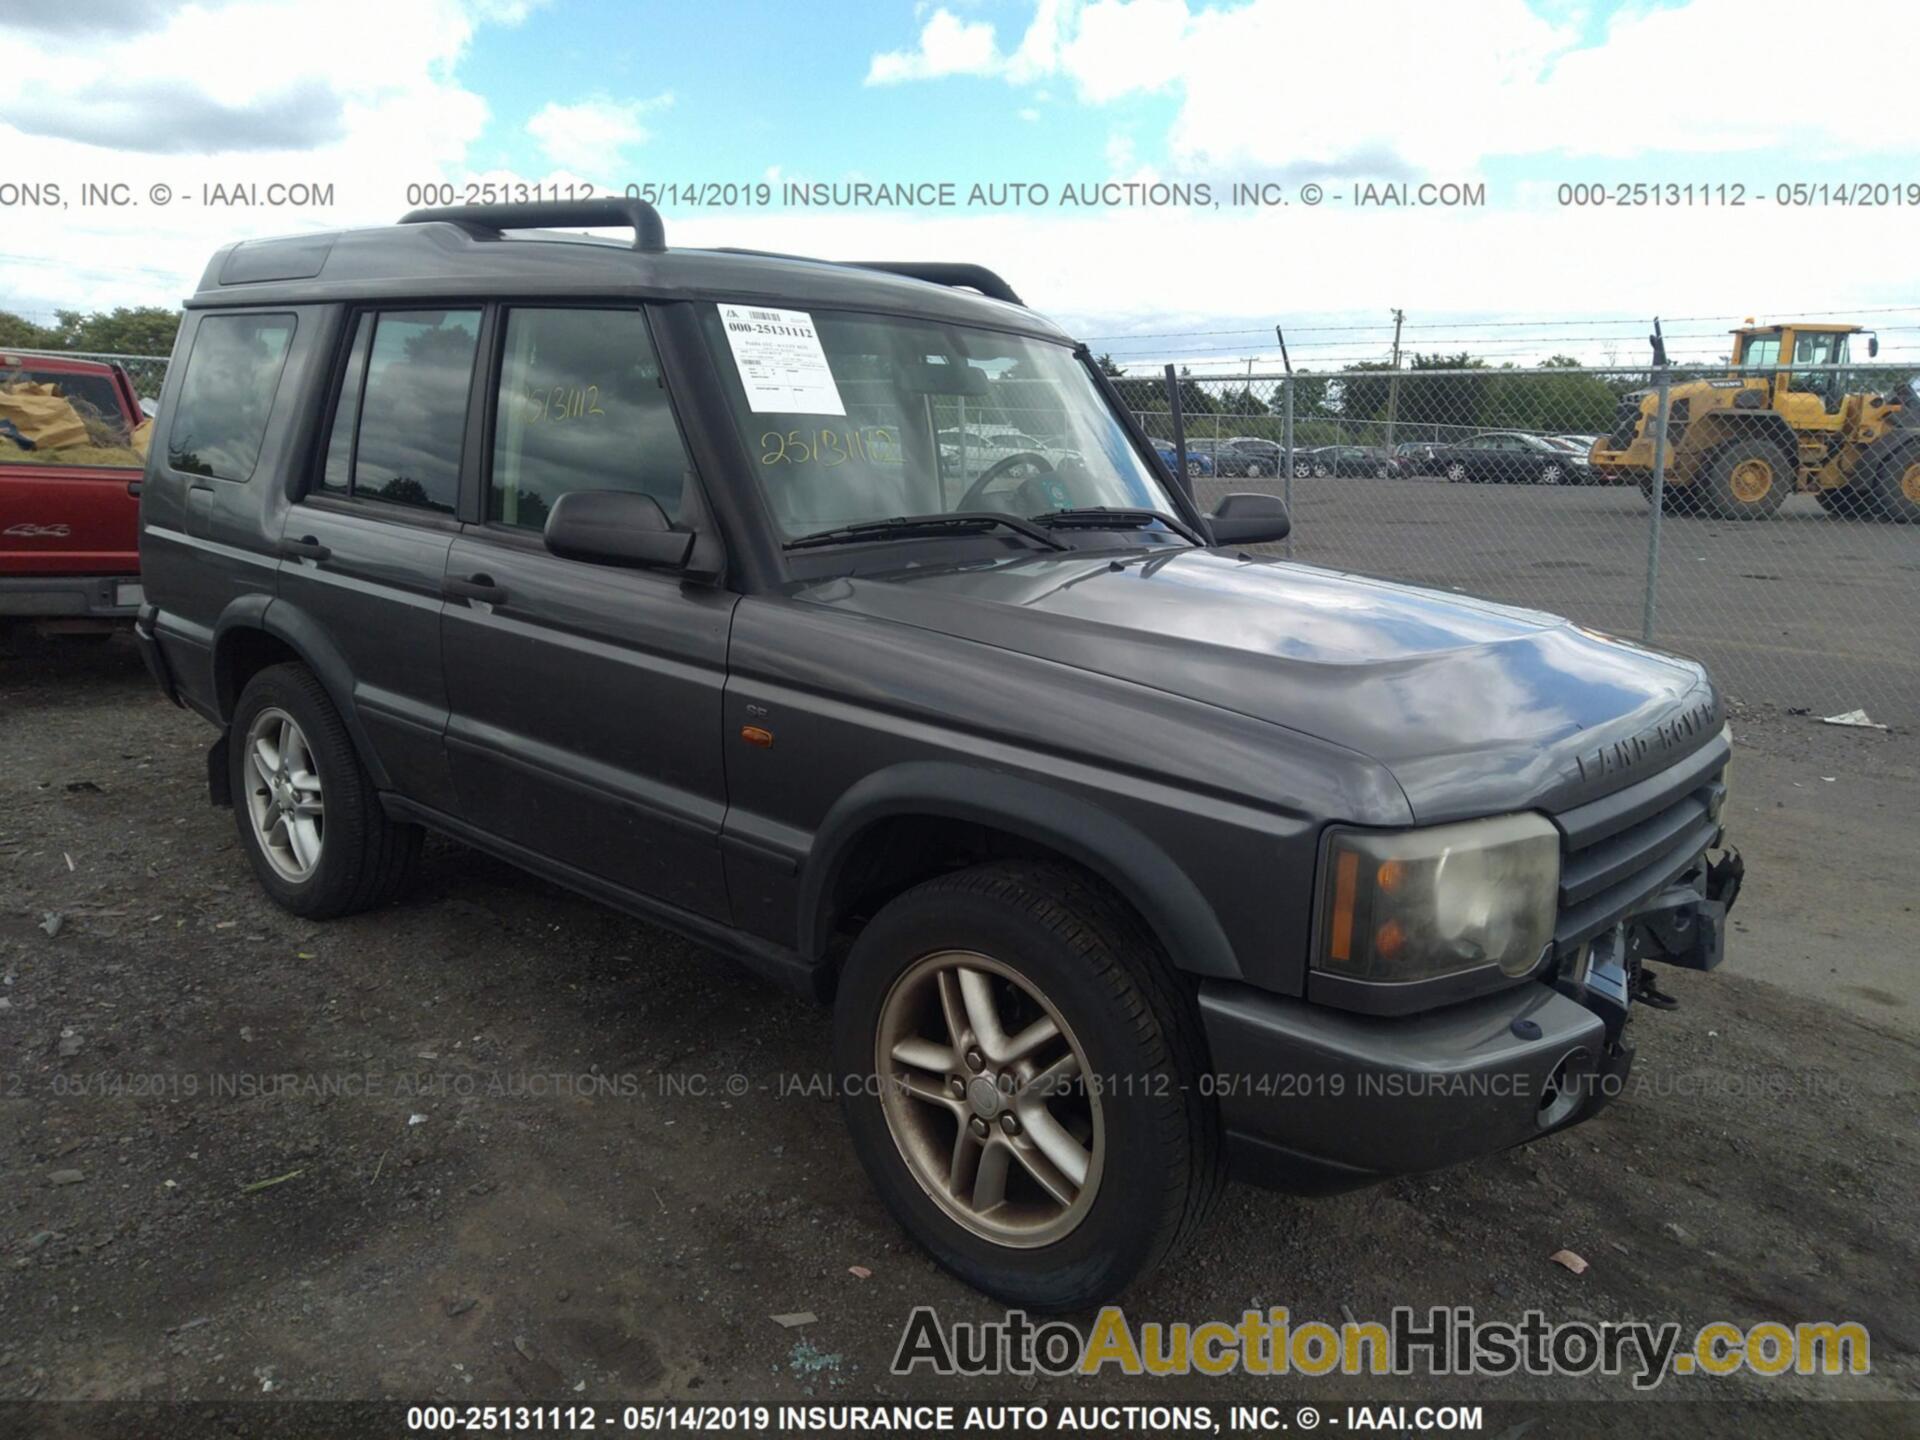 LAND ROVER DISCOVERY II, SALTY19404A839950